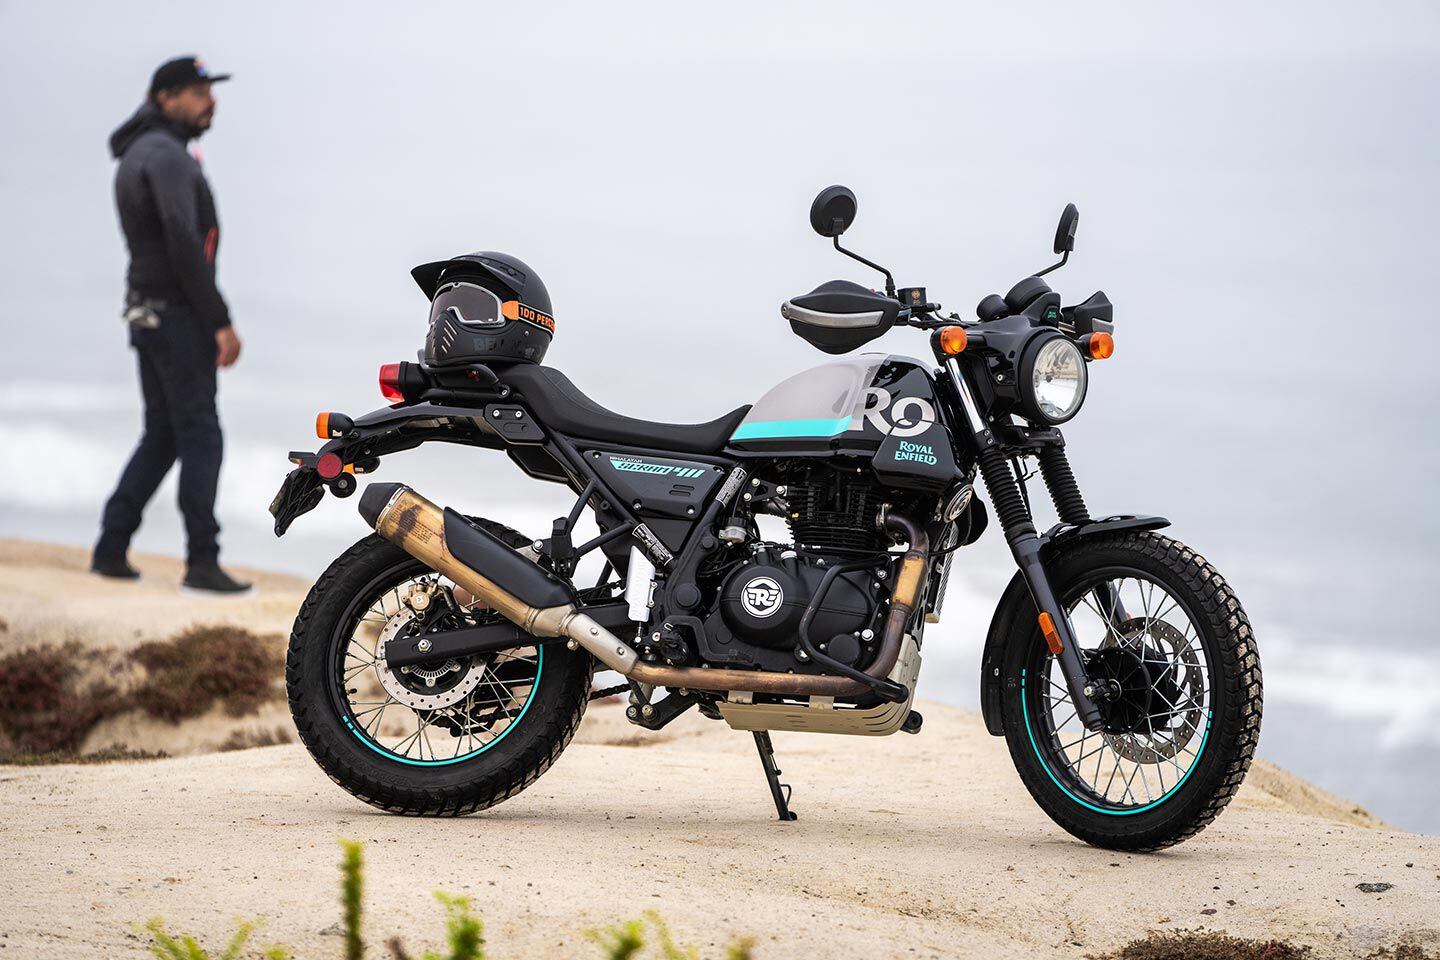 New for the 2022 model year, the Royal Enfield Scram 411 ($5,099) is an entry-level air-cooled scrambler-style streetbike.